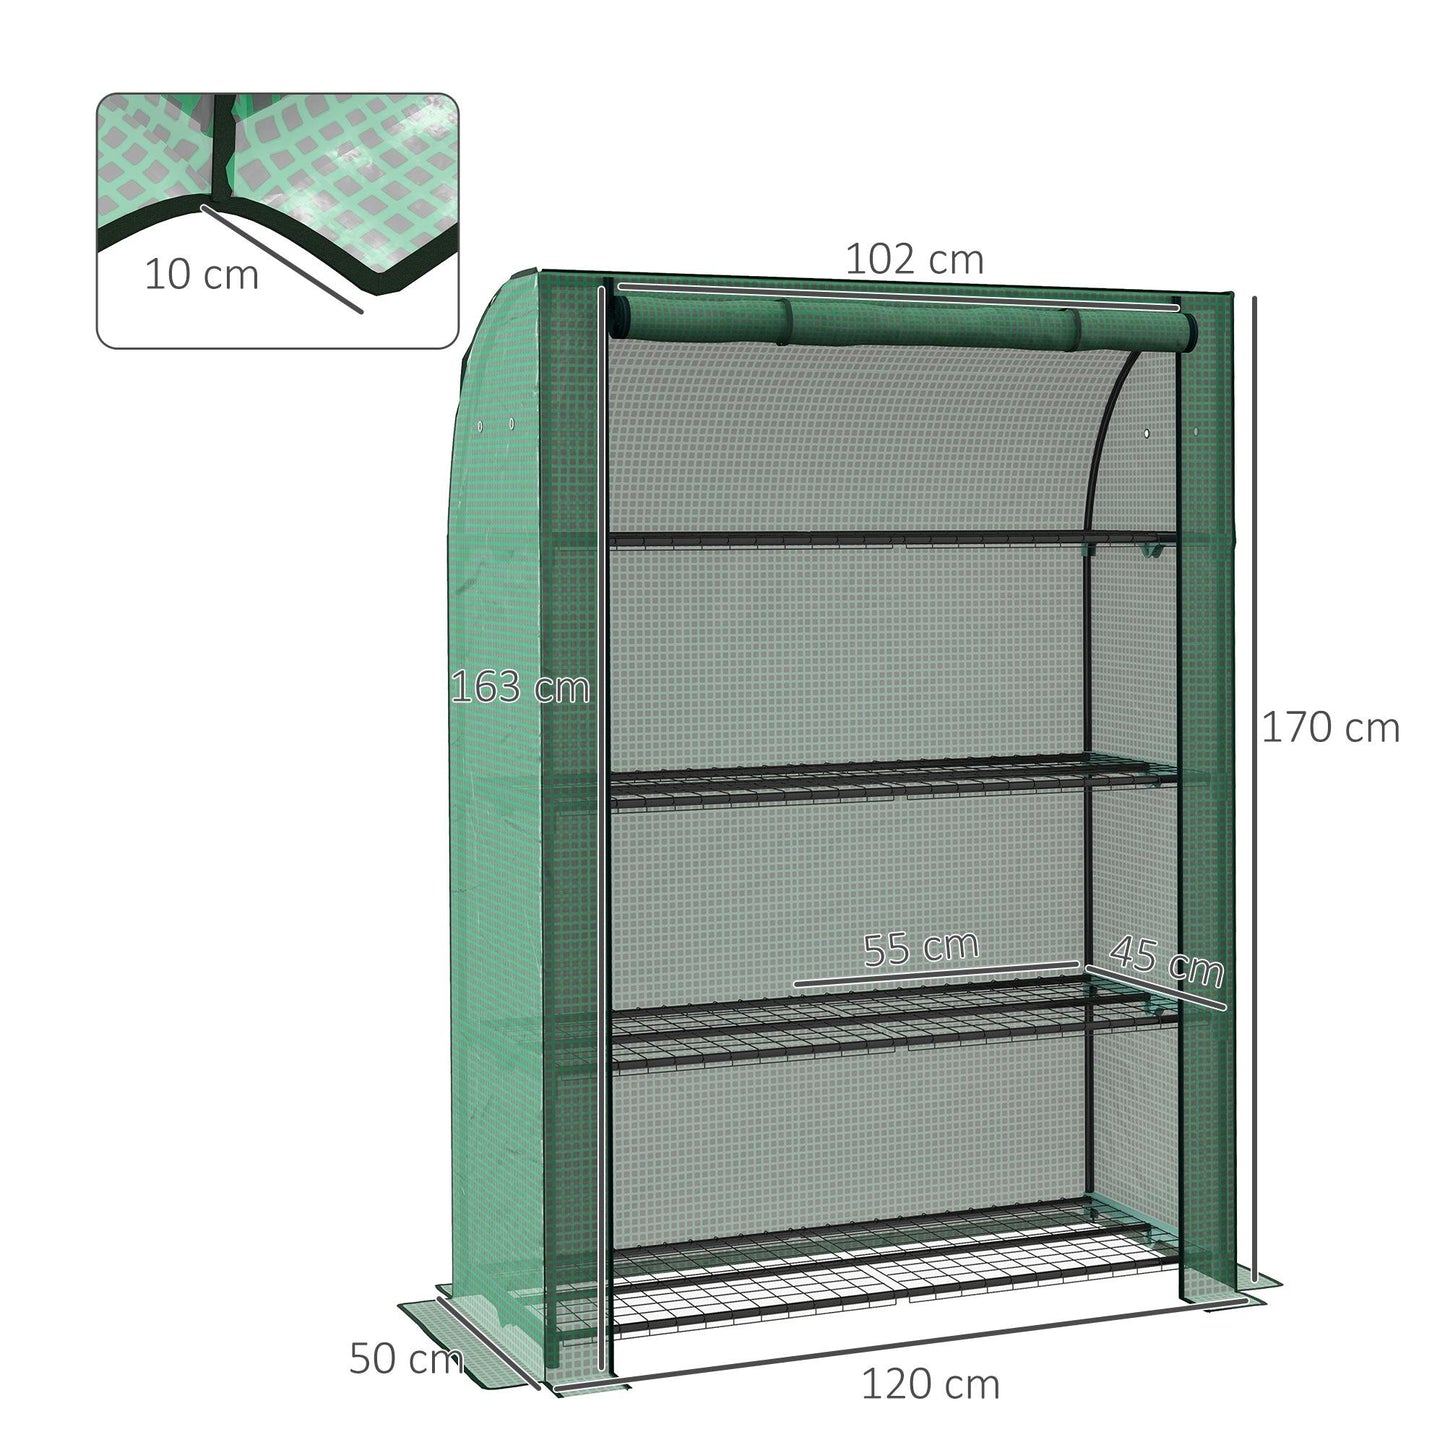 Outsunny 4 Tier Mini Greenhouse with Reinforced PE Cover, Portable Green House w/ Roll-up Door and Wire Shelves, 170H x 120W x 50Dcm, Green - ALL4U RETAILER LTD